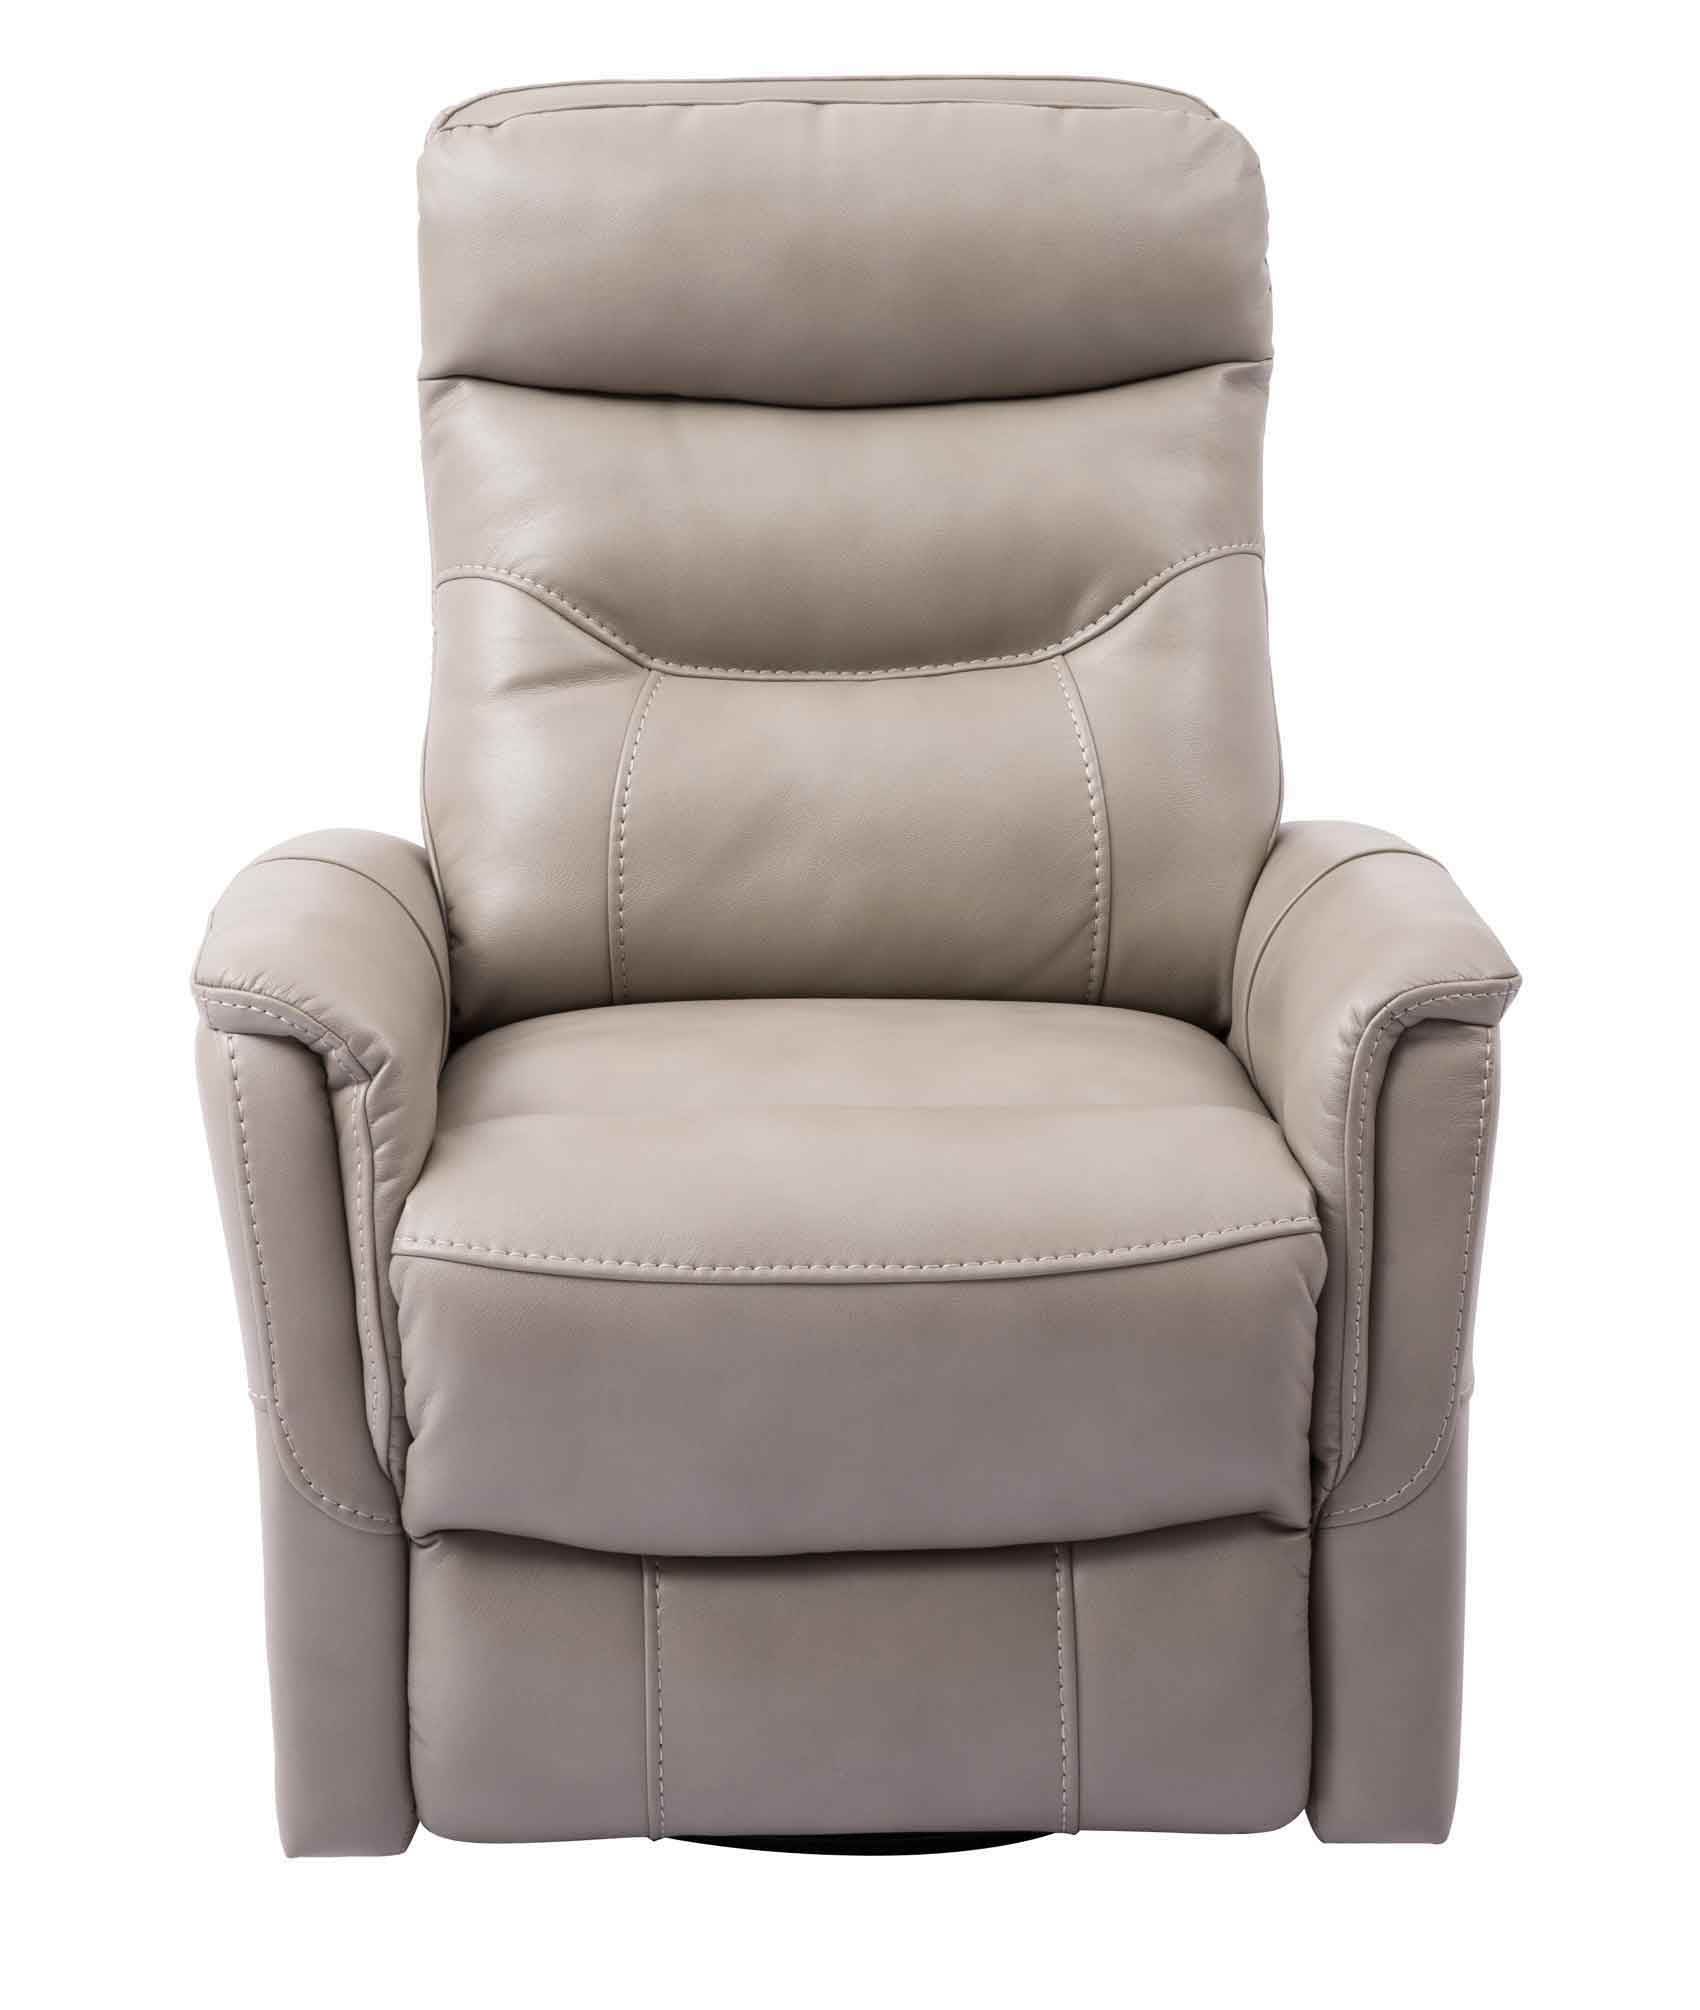 What Are The Most Common Problems With Recliners?